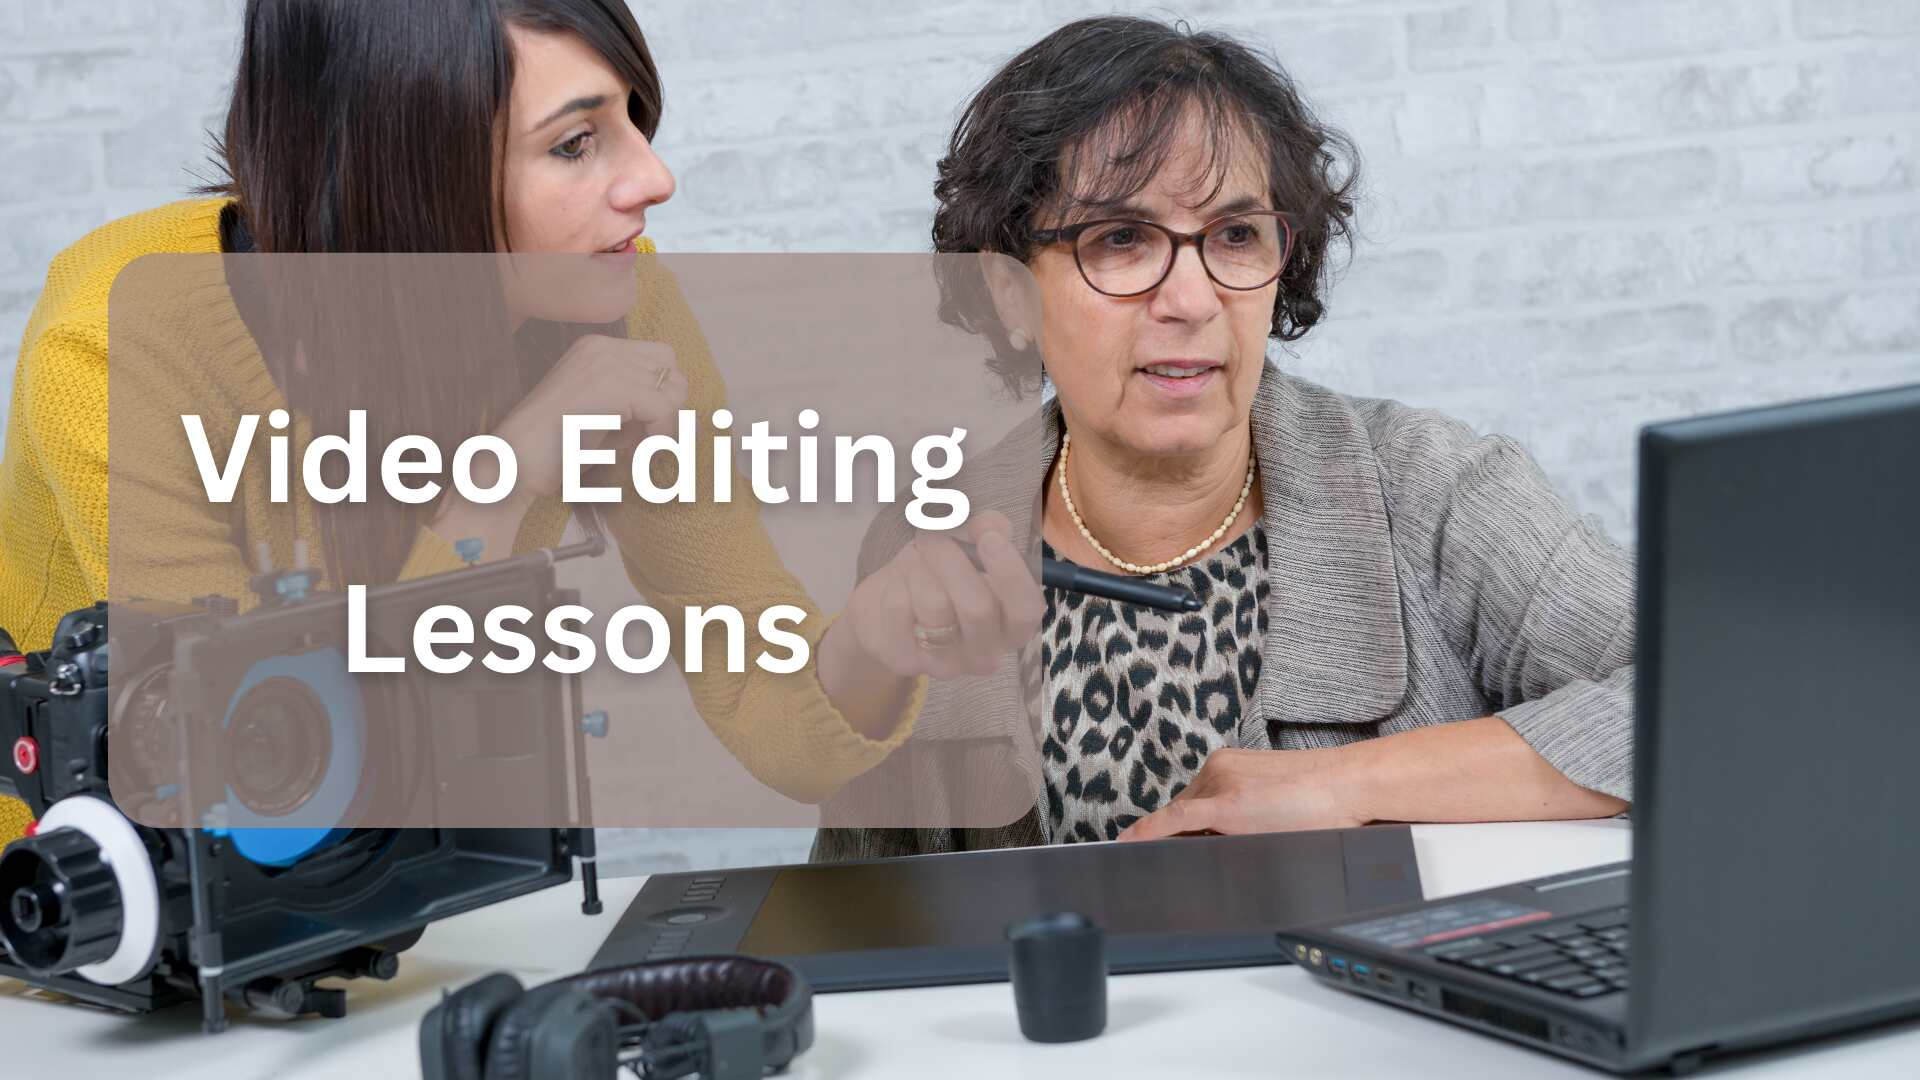 Video Editing Lessons